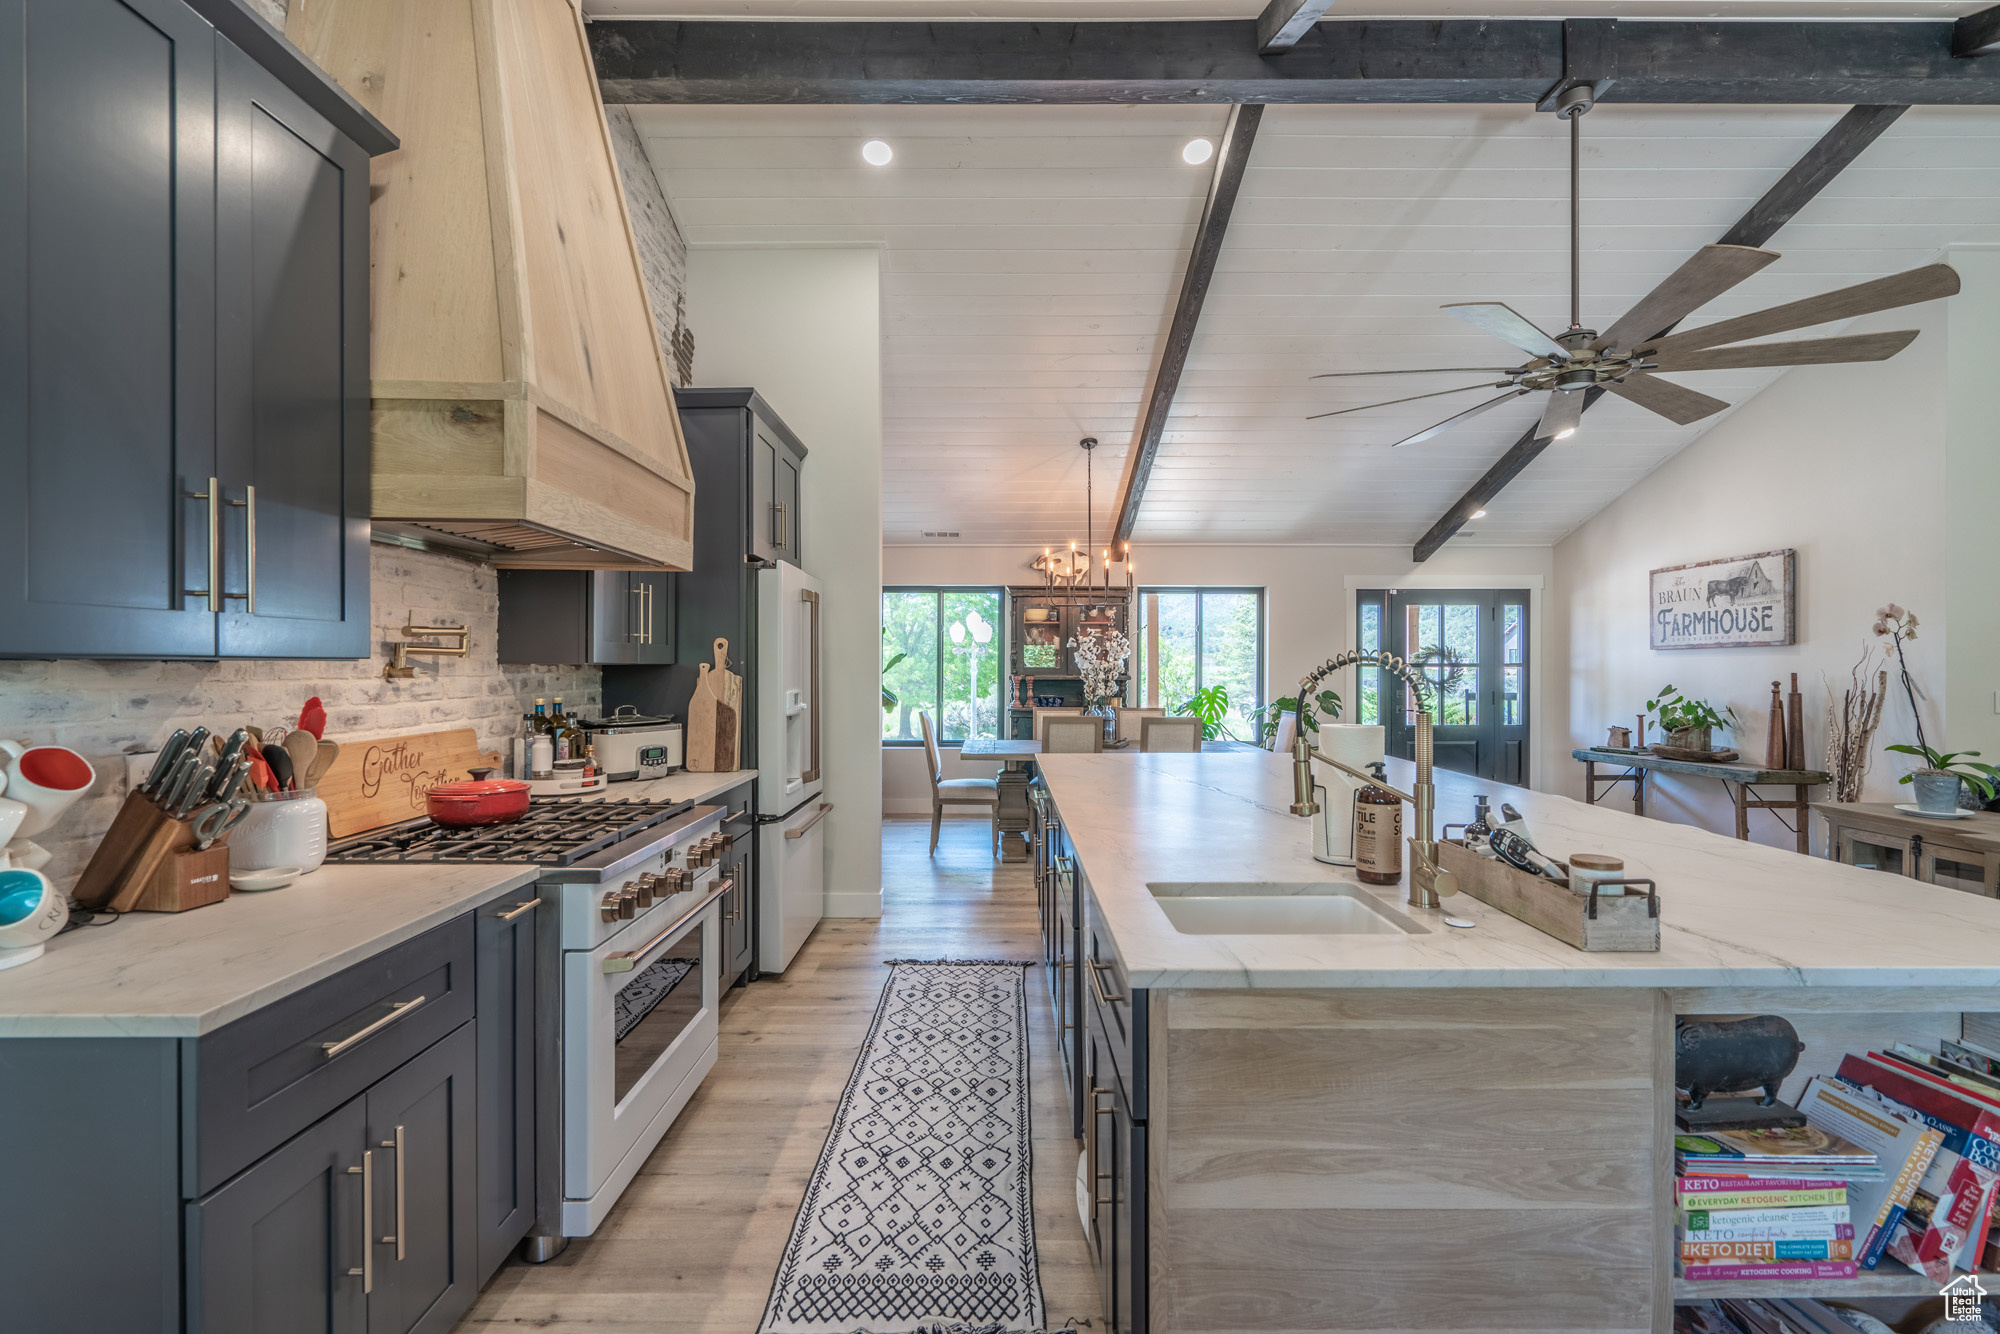 Kitchen with ceiling fan with notable chandelier, hanging light fixtures, lofted ceiling with beams, high end appliances, and a center island with sink